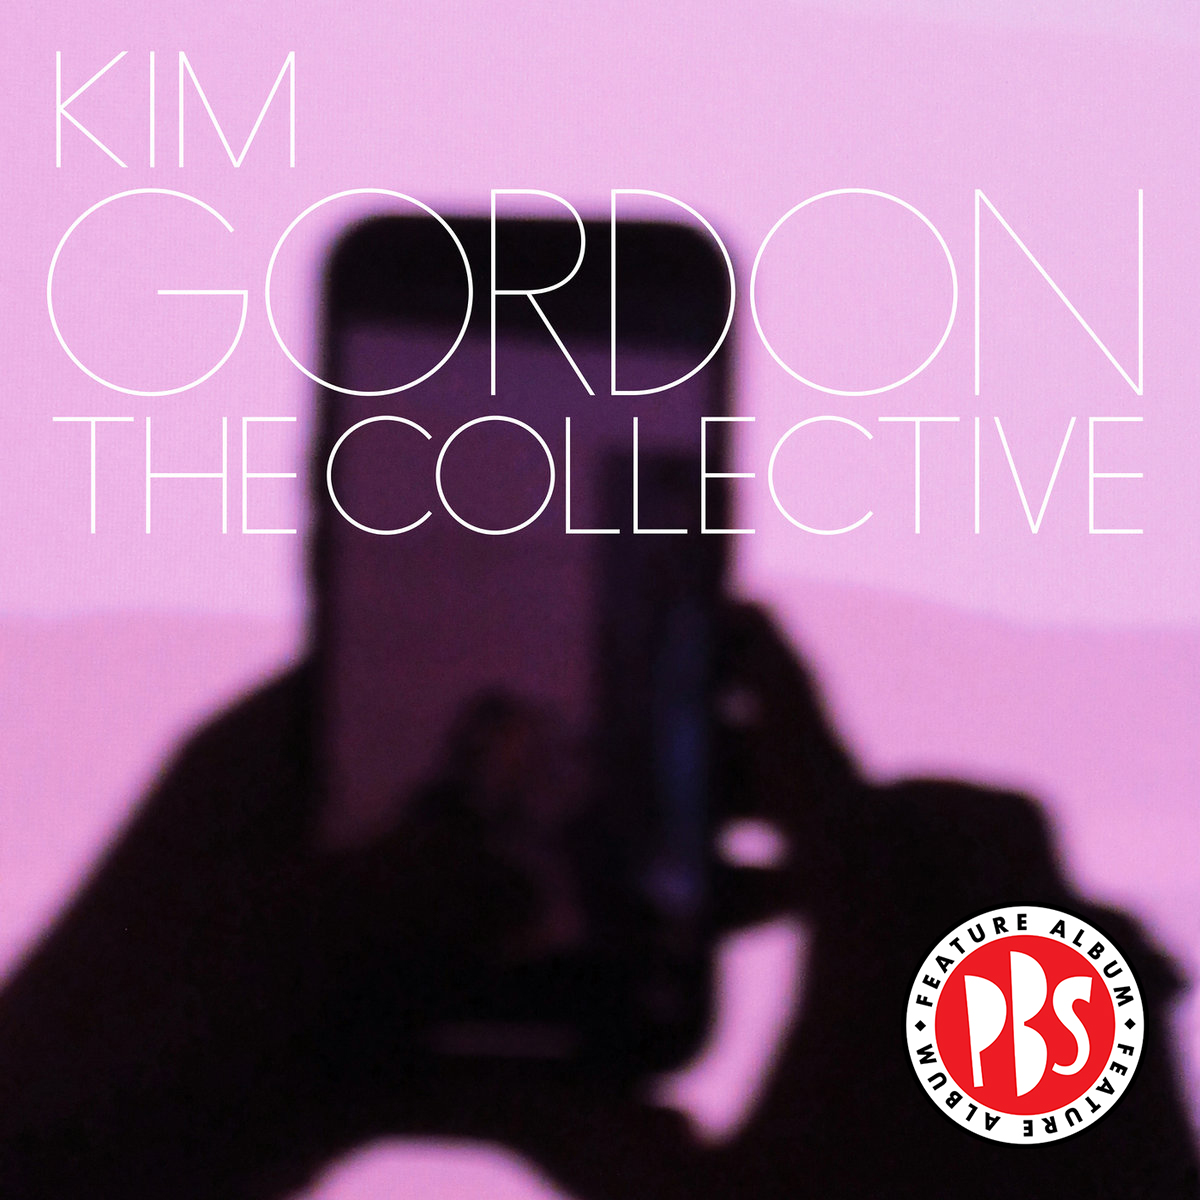 This week’s #PBSFeatureAlbum is 'The Collective', the second solo album by legendary multi-disciplinary artist @KimletGordon. Tune in to hear tracks from 'The Collective', and check out this week's full list of #PBSFeatureSounds on our website: pbsfm.org.au/news/kim-gordo… #pbsfm